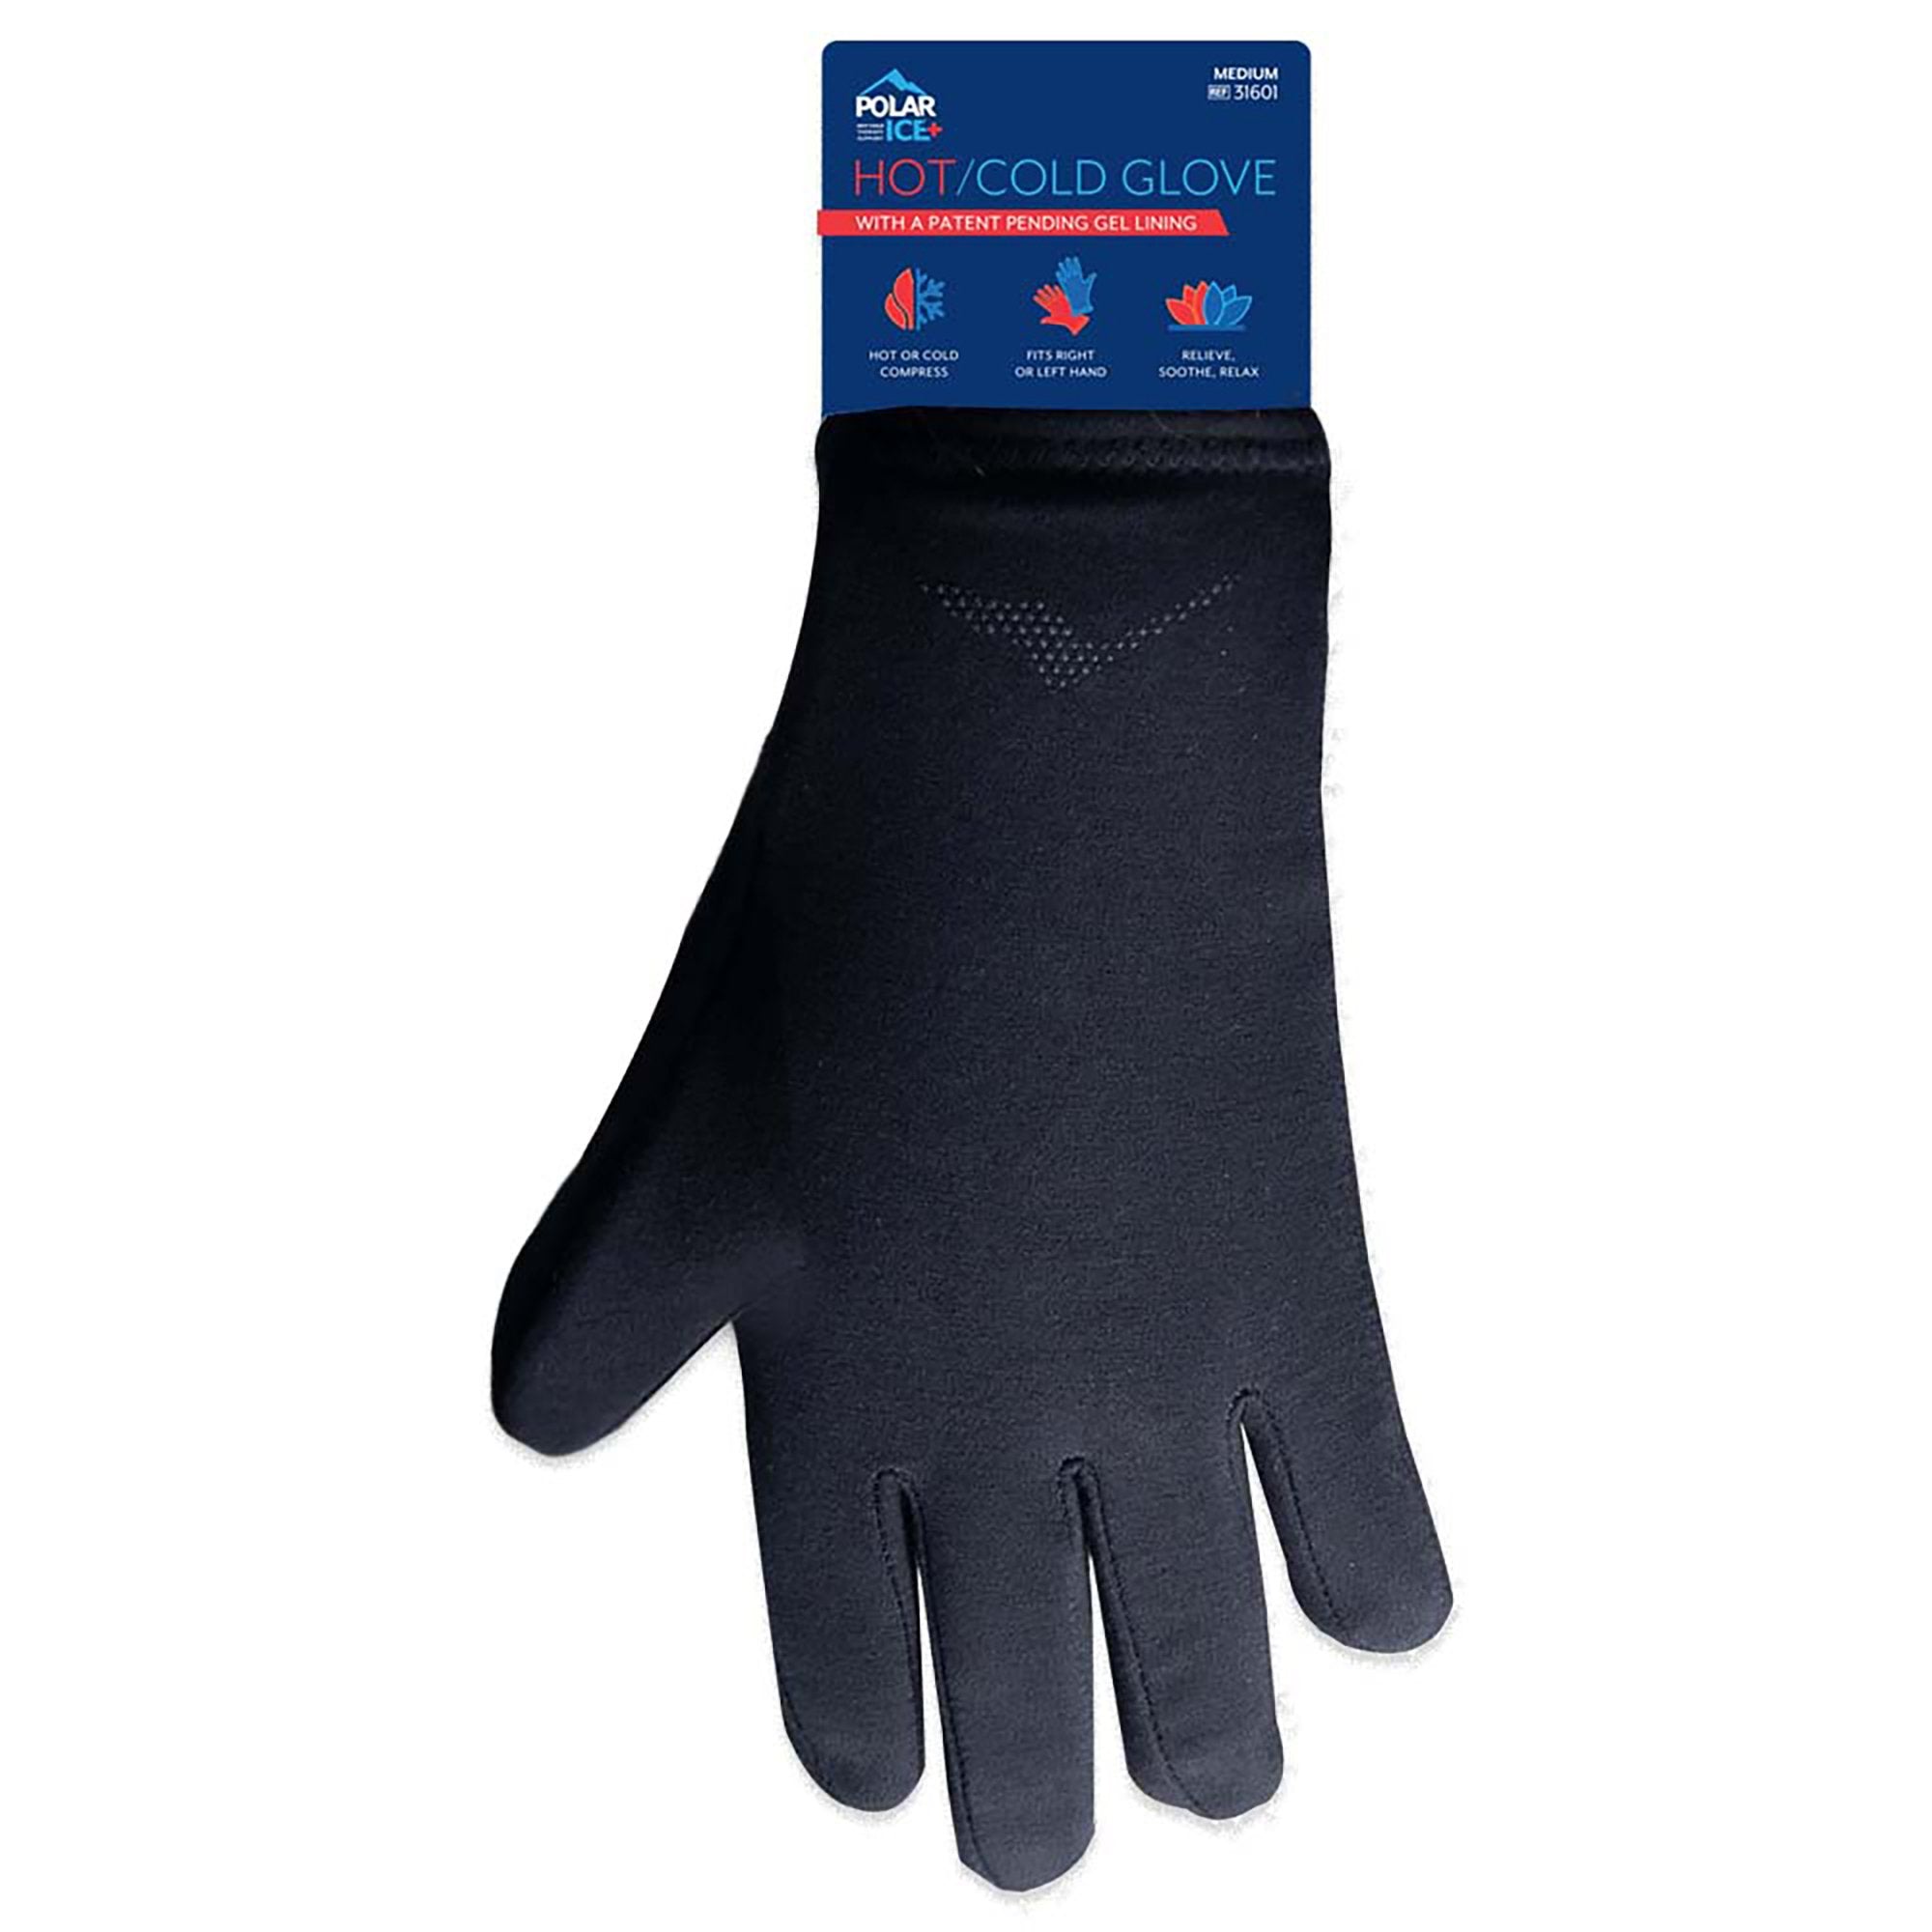 POLAR ICE? HOT / COLD THERAPY GLOVE, SMALL, SOLD AS 50/CASE BROWNMED 31600